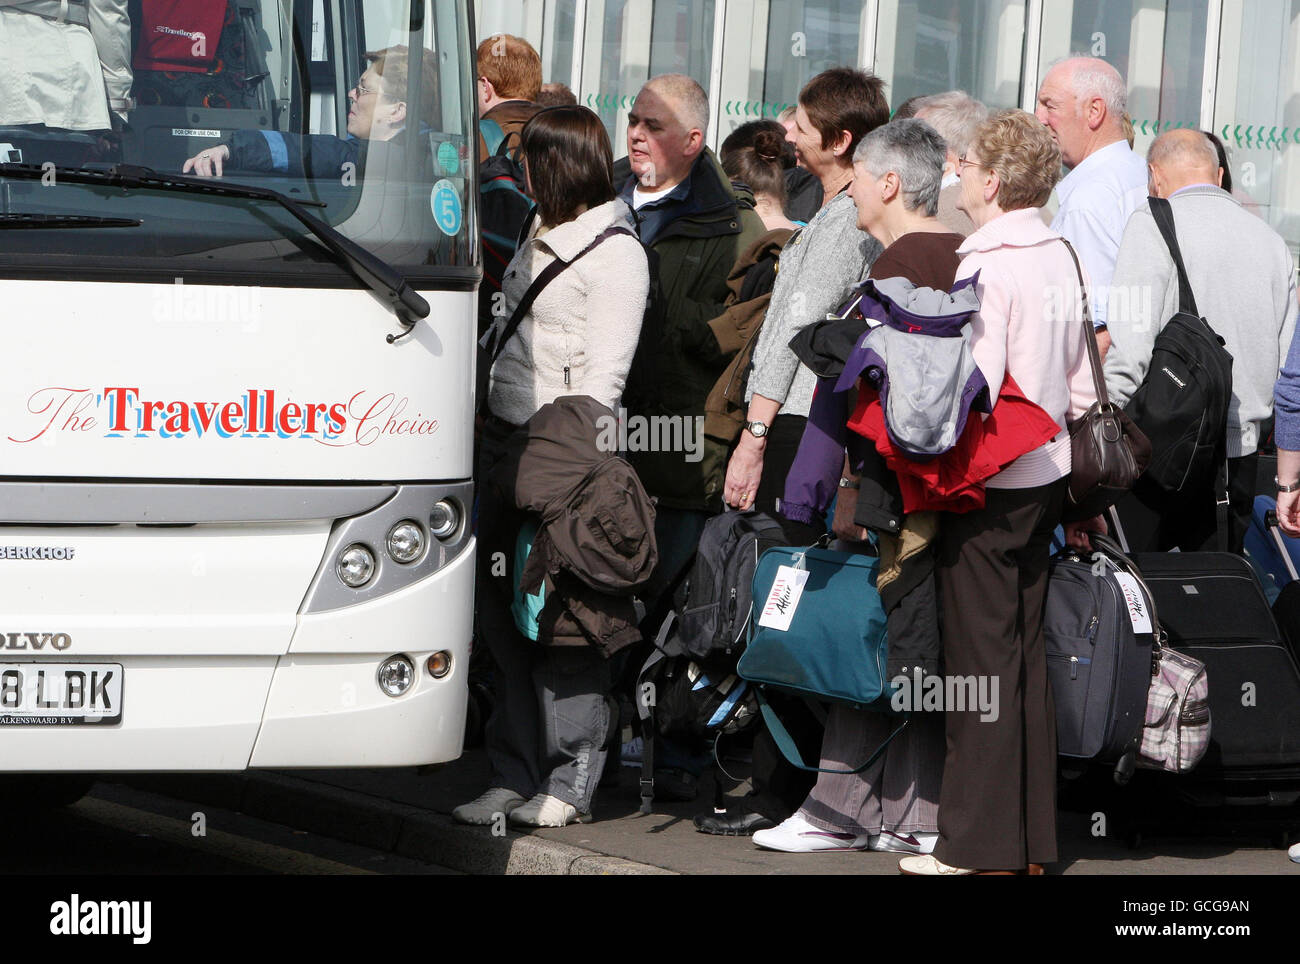 Air passengers at Glasgow Airport, which is closed due to volcanic ash in the atmosphere, board buses to take them to other UK airports so they can continue their journey. Stock Photo